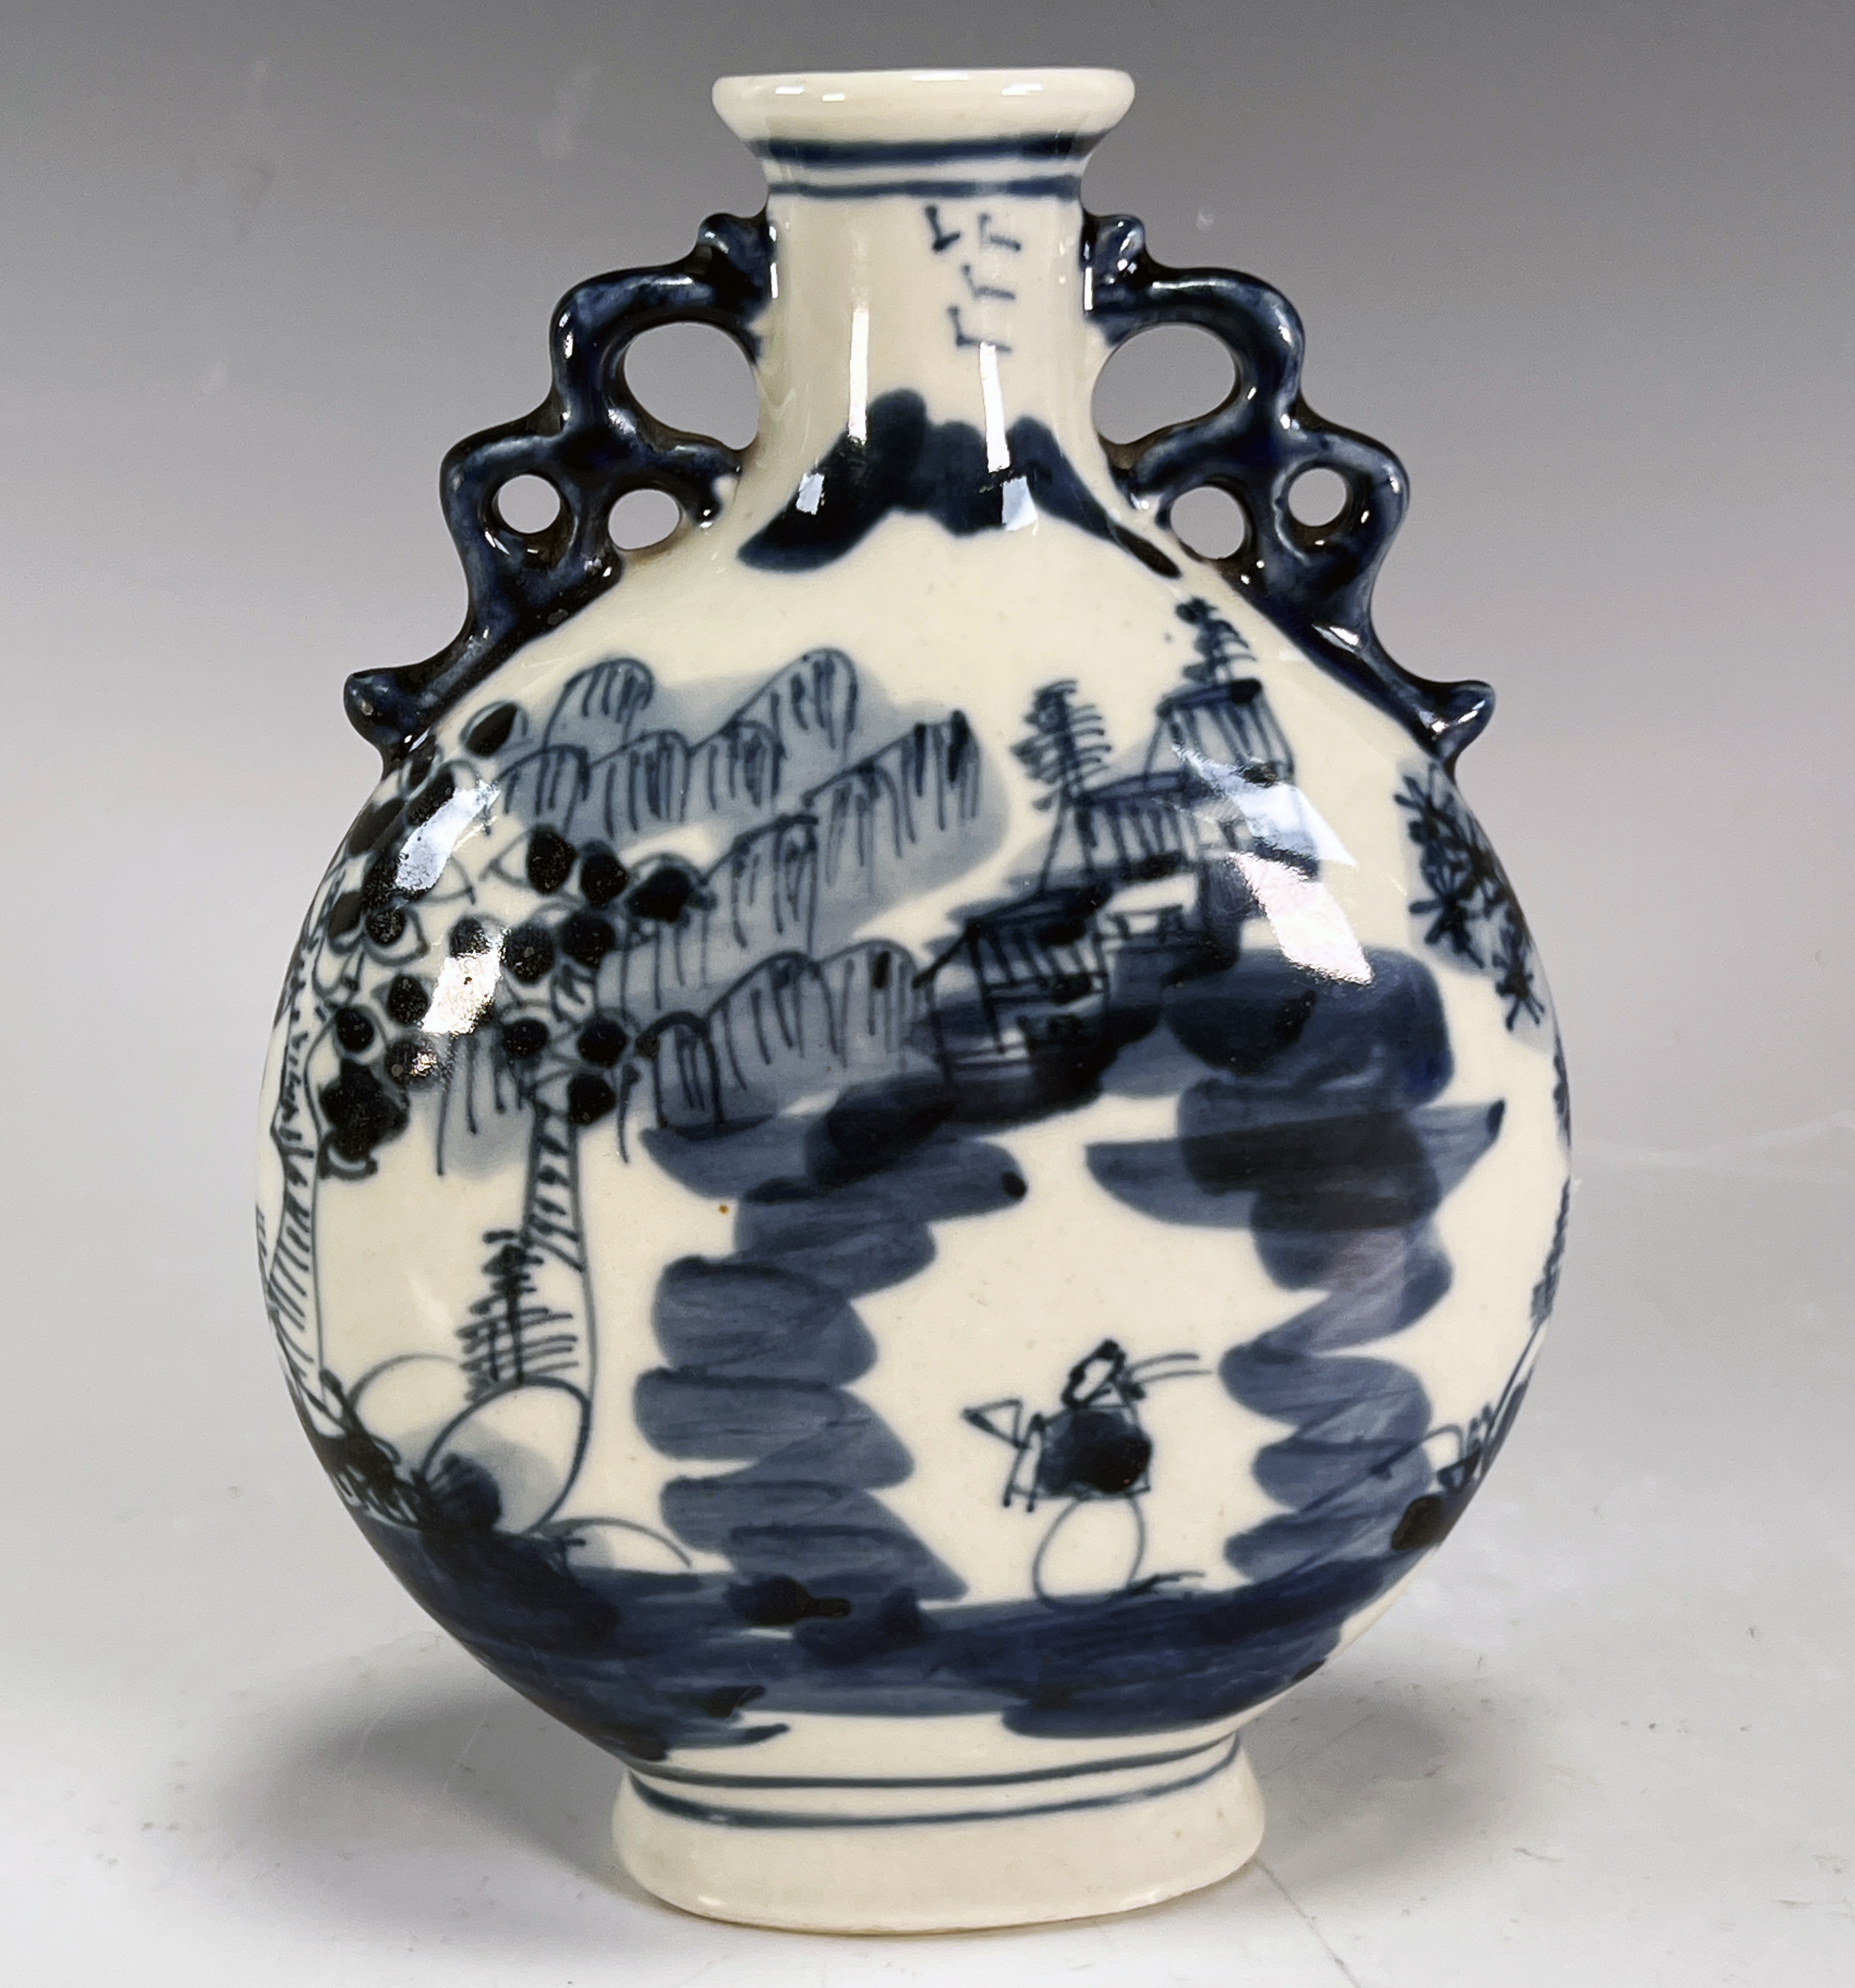 Exquisite Blue & White Chinese Moonflask Vase - 6.5 Inches image 3